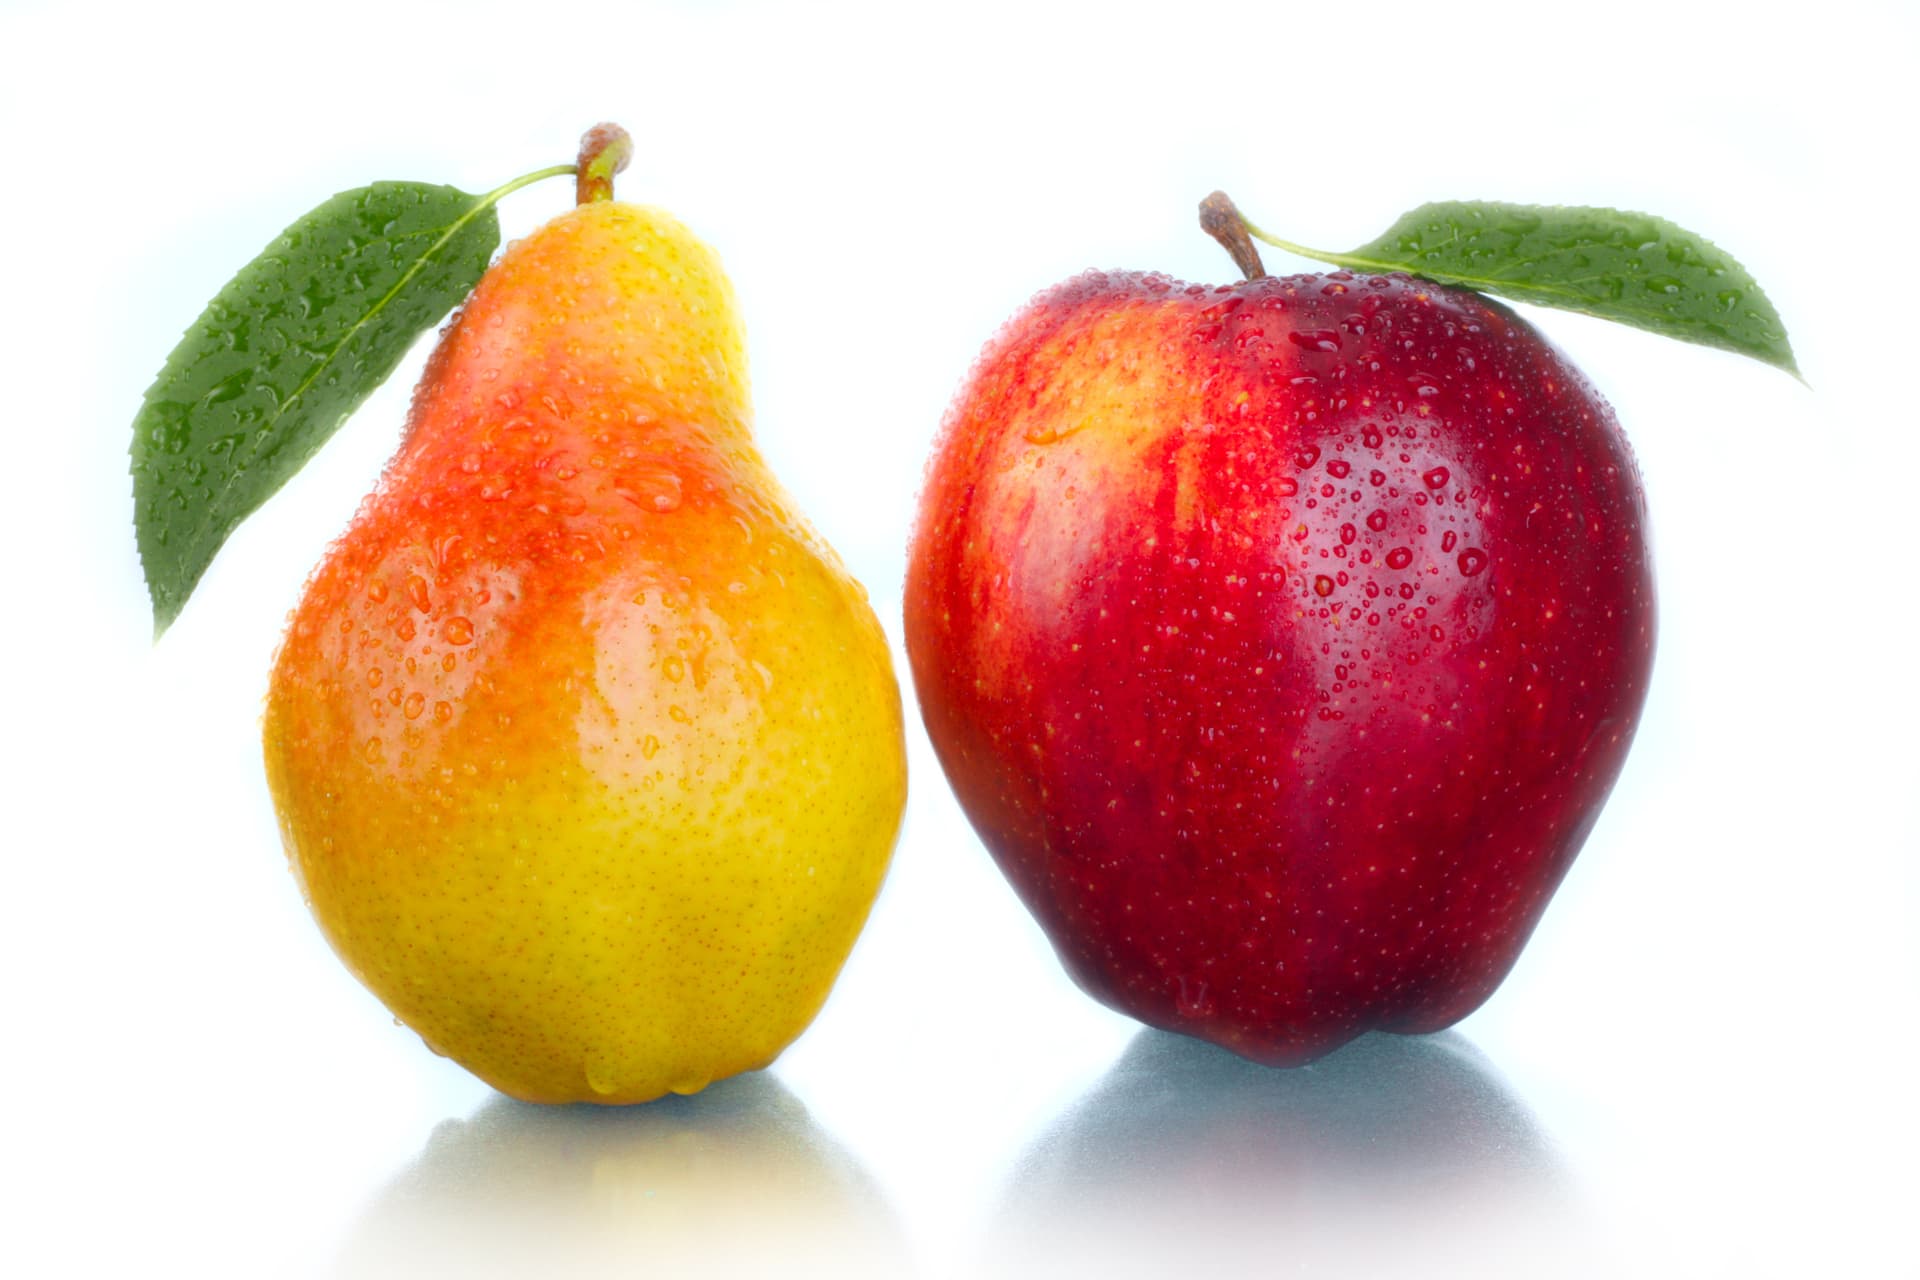 pear and apple comparing body shape